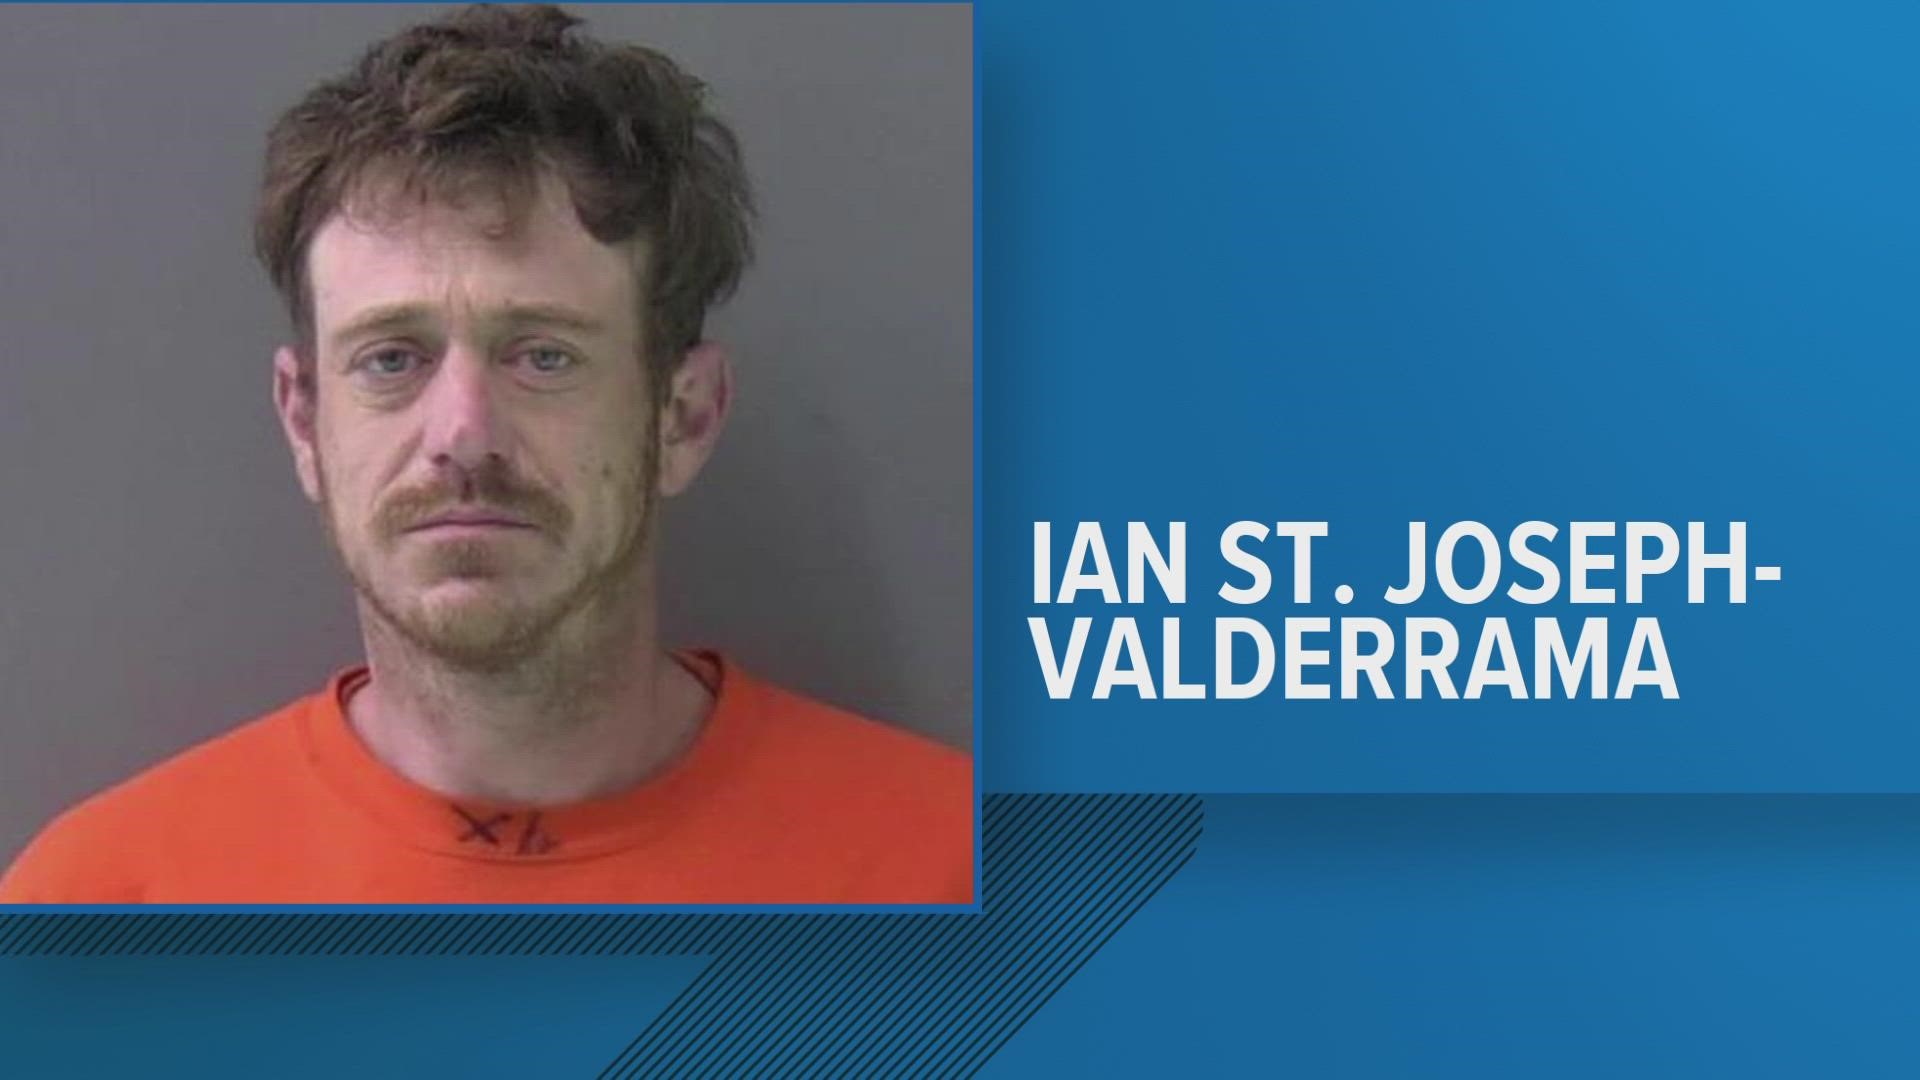 An arrest affidavit obtained by 6 News said 38-year-old Ian St. Joseph-Valderrama texted his mother his plan to kill the victim before the shooting took place.